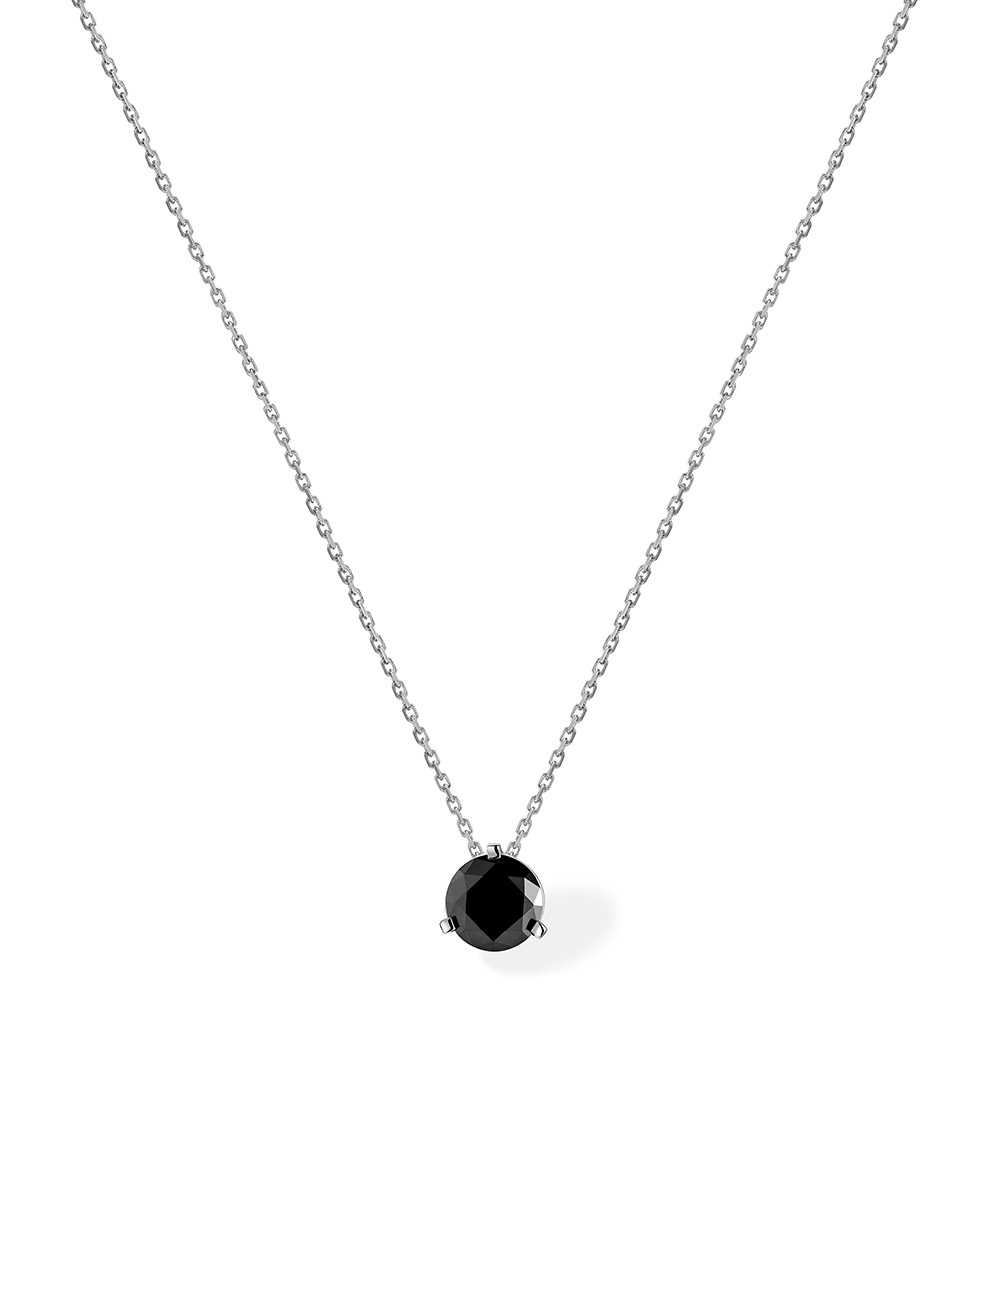 For Her and Him: 18k White Gold Solitaire Pendant with an approximate 6.8mm Black Diamond